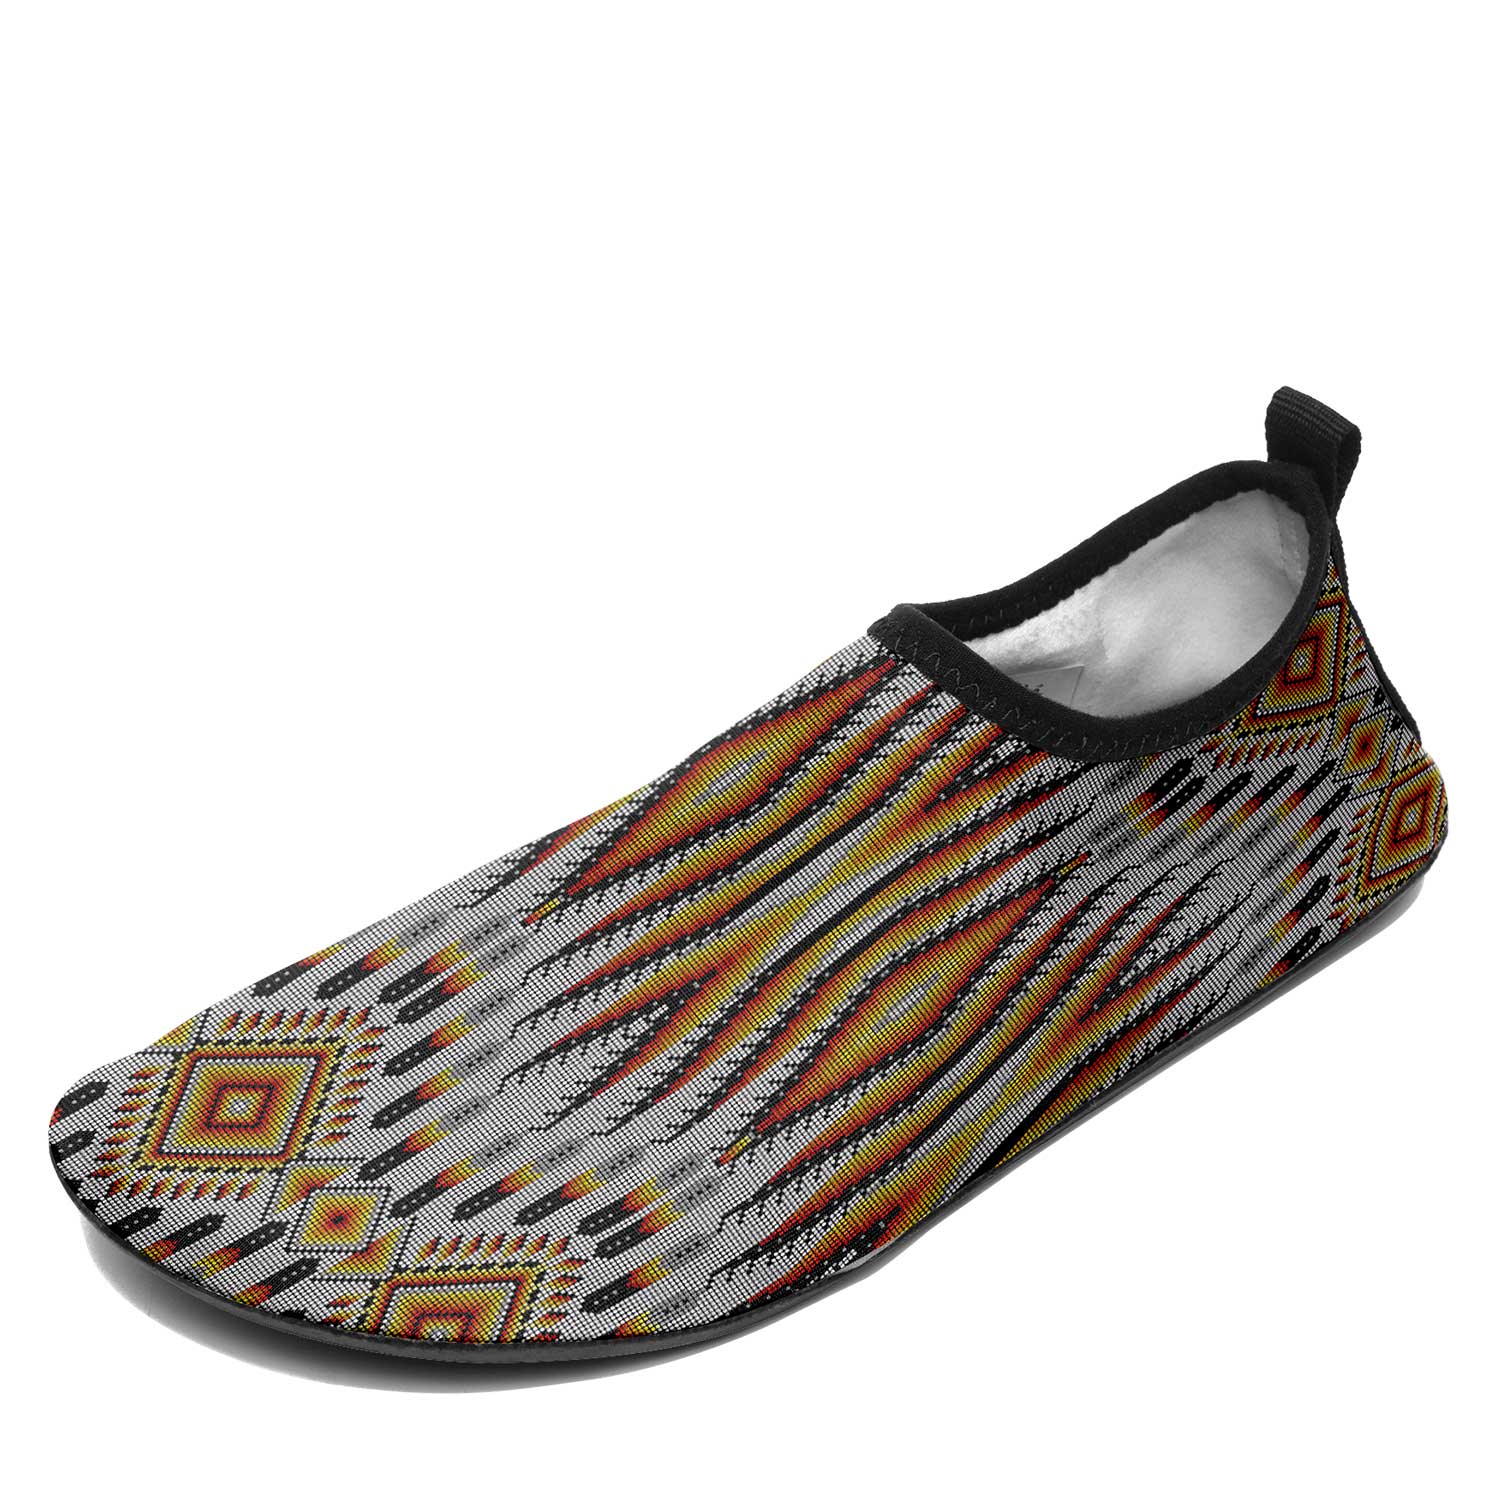 Fire Feather White Kid's Sockamoccs Slip On Shoes